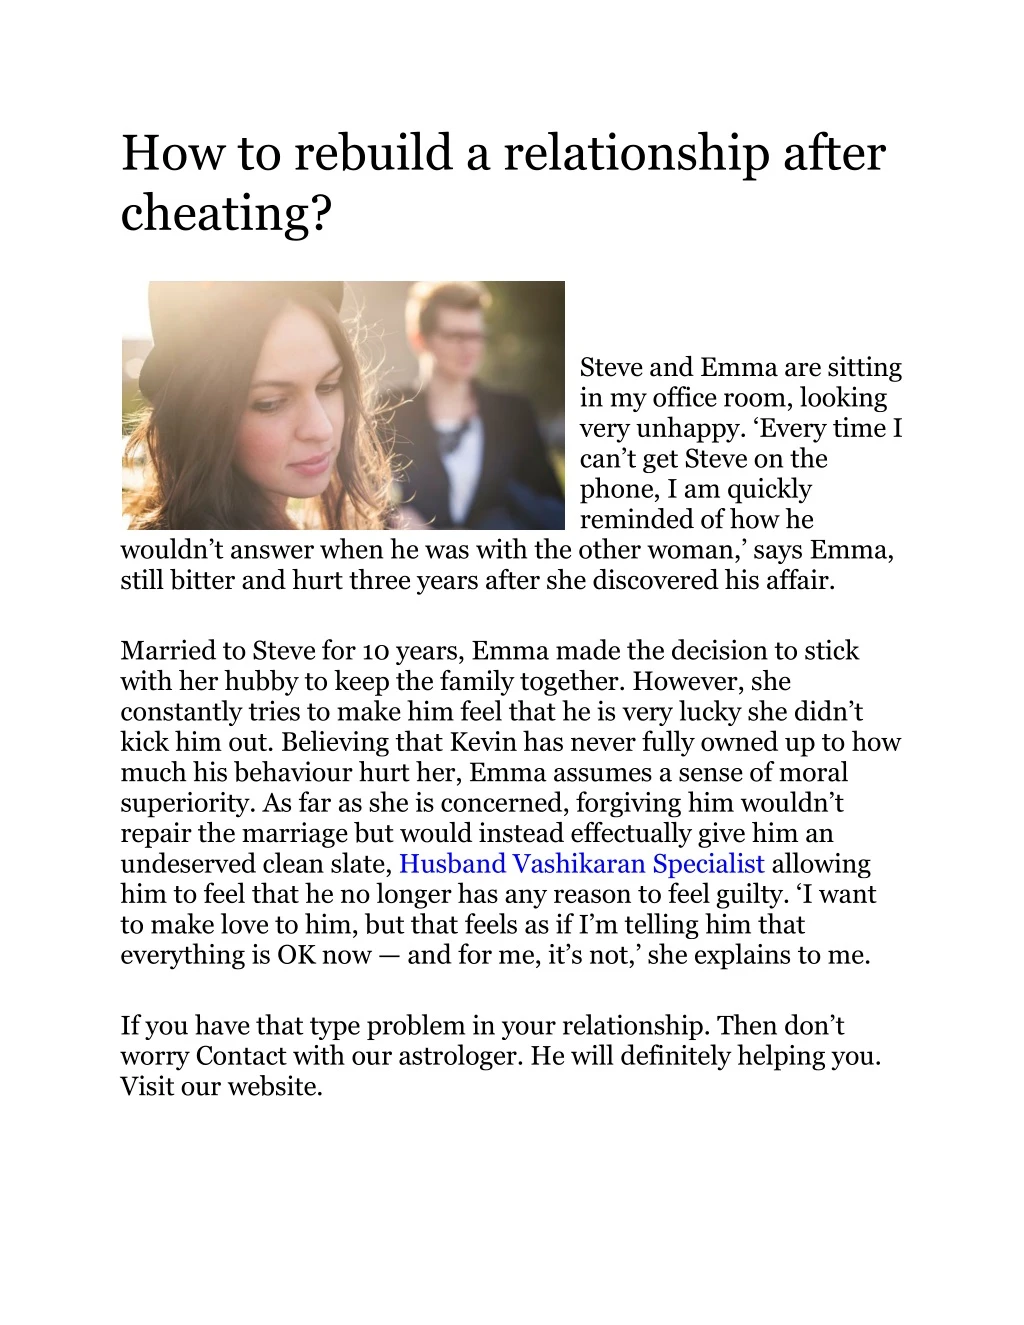 how to rebuild a relationship after cheating